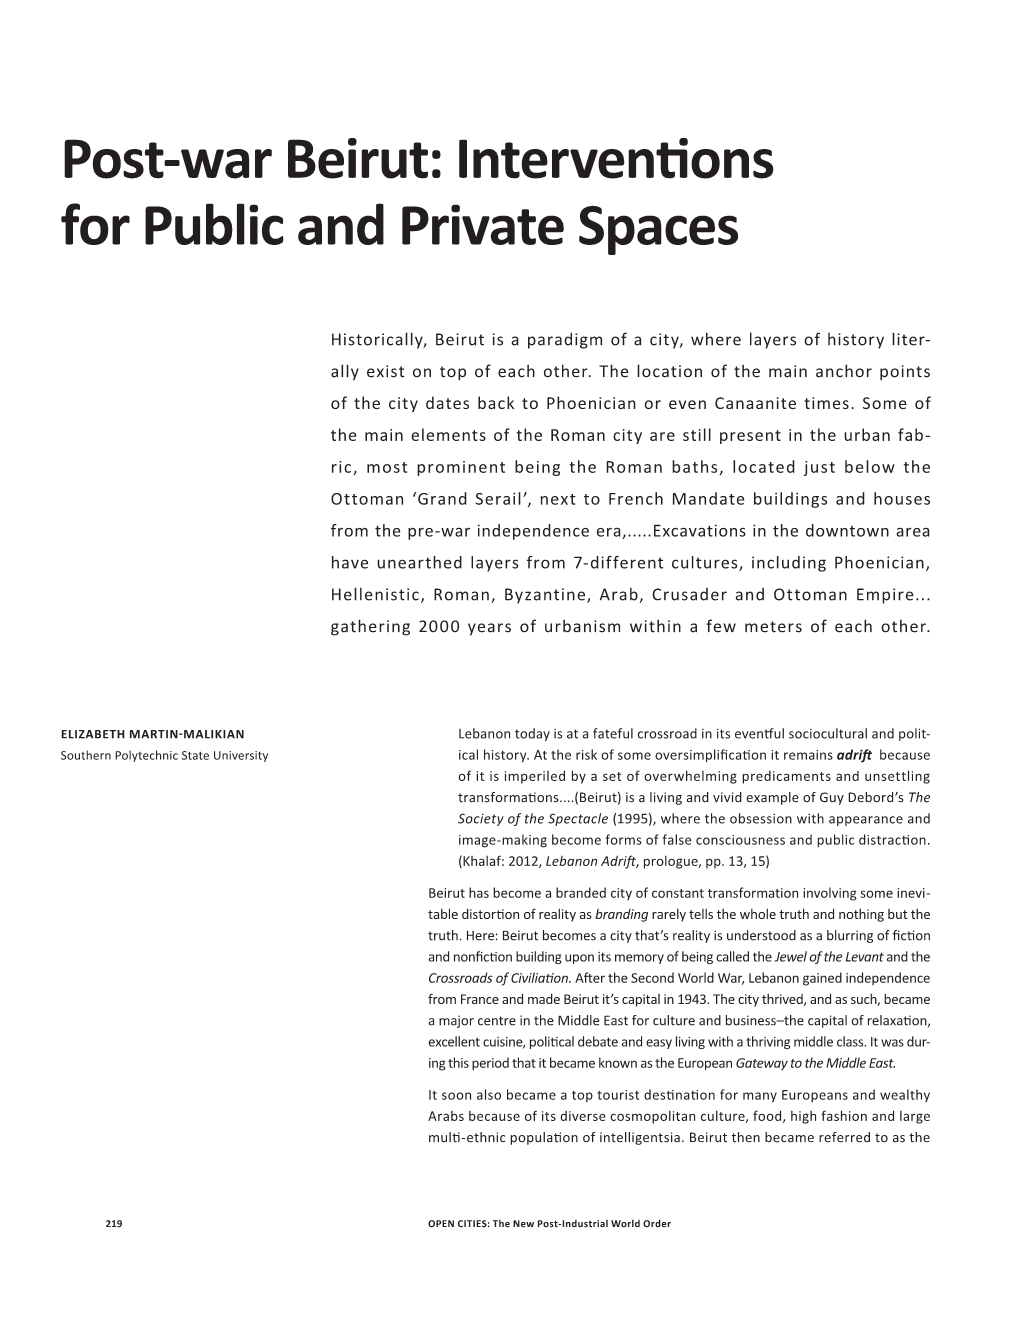 Post-War Beirut: Interventions for Public and Private Spaces